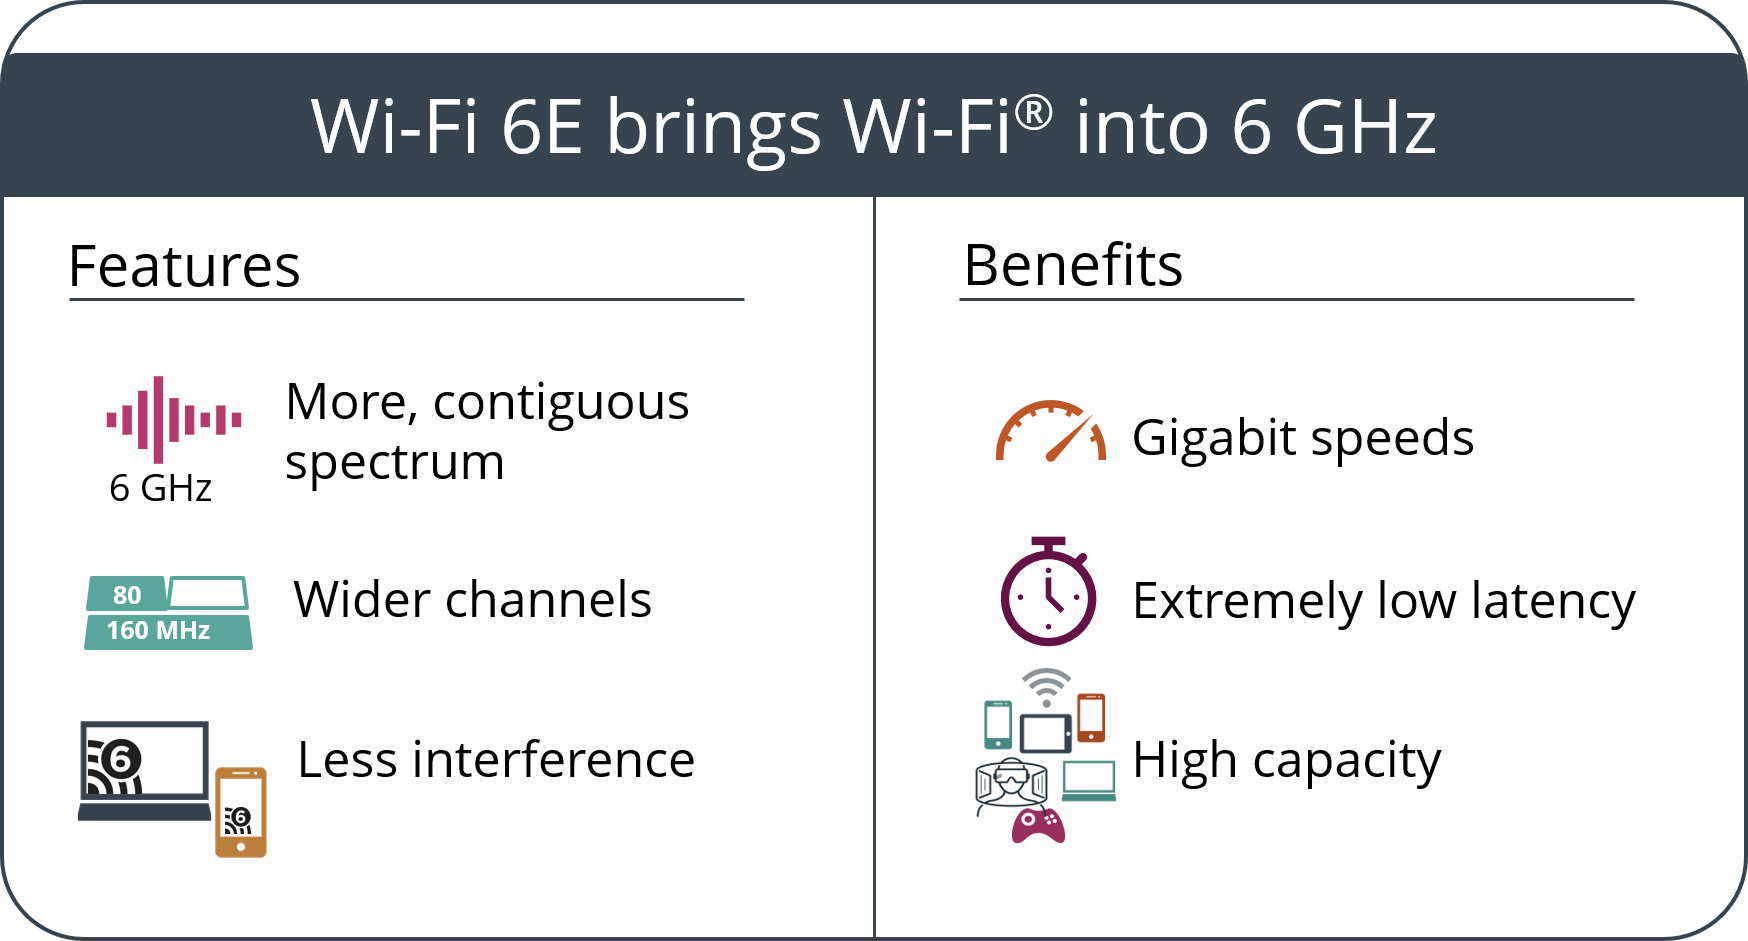 Wi-Fi 6E features benefits